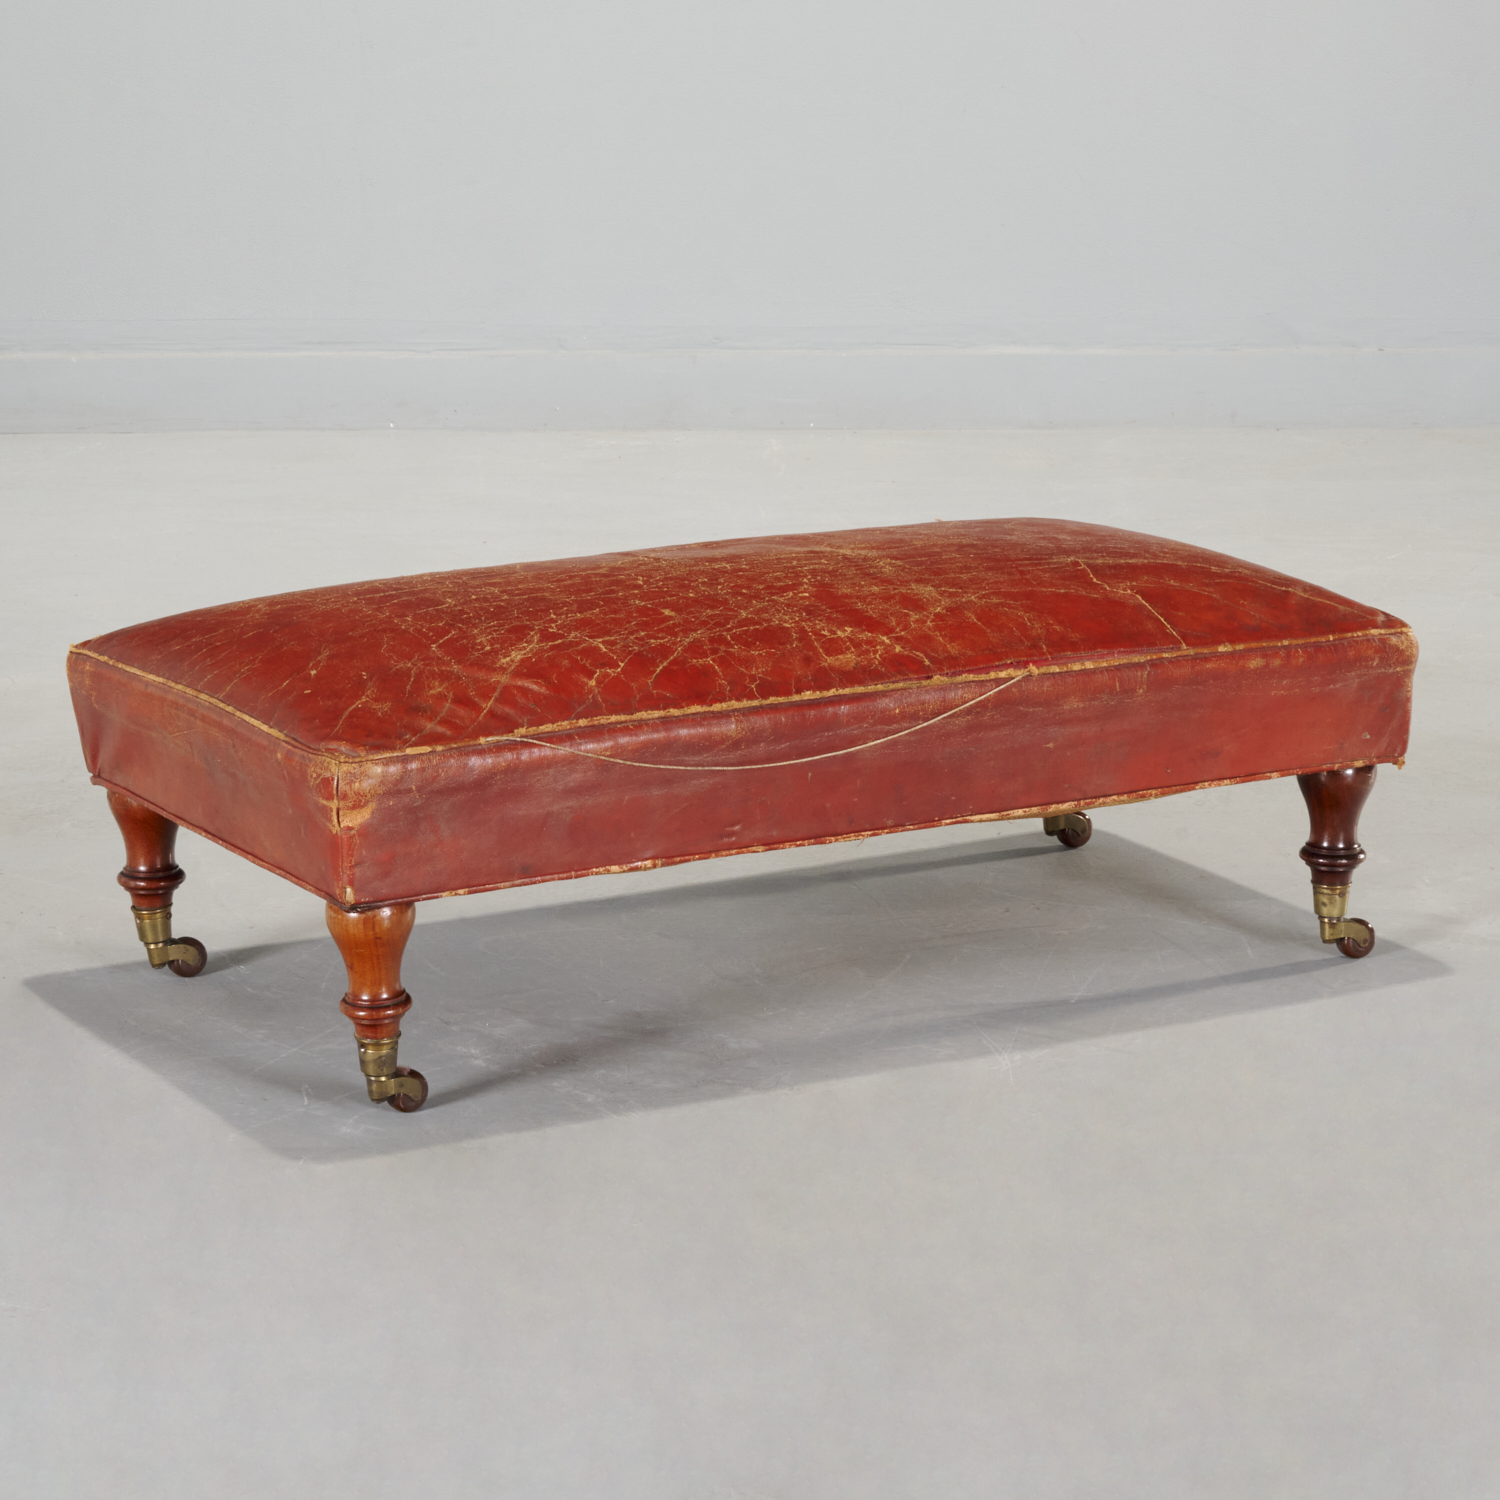 EDWARDIAN VINTAGE RED LEATHER FOOTSTOOL 2fabb4